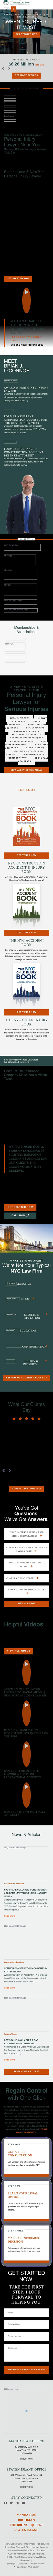 The O'Connor Law Firm - New York NY Lawyers